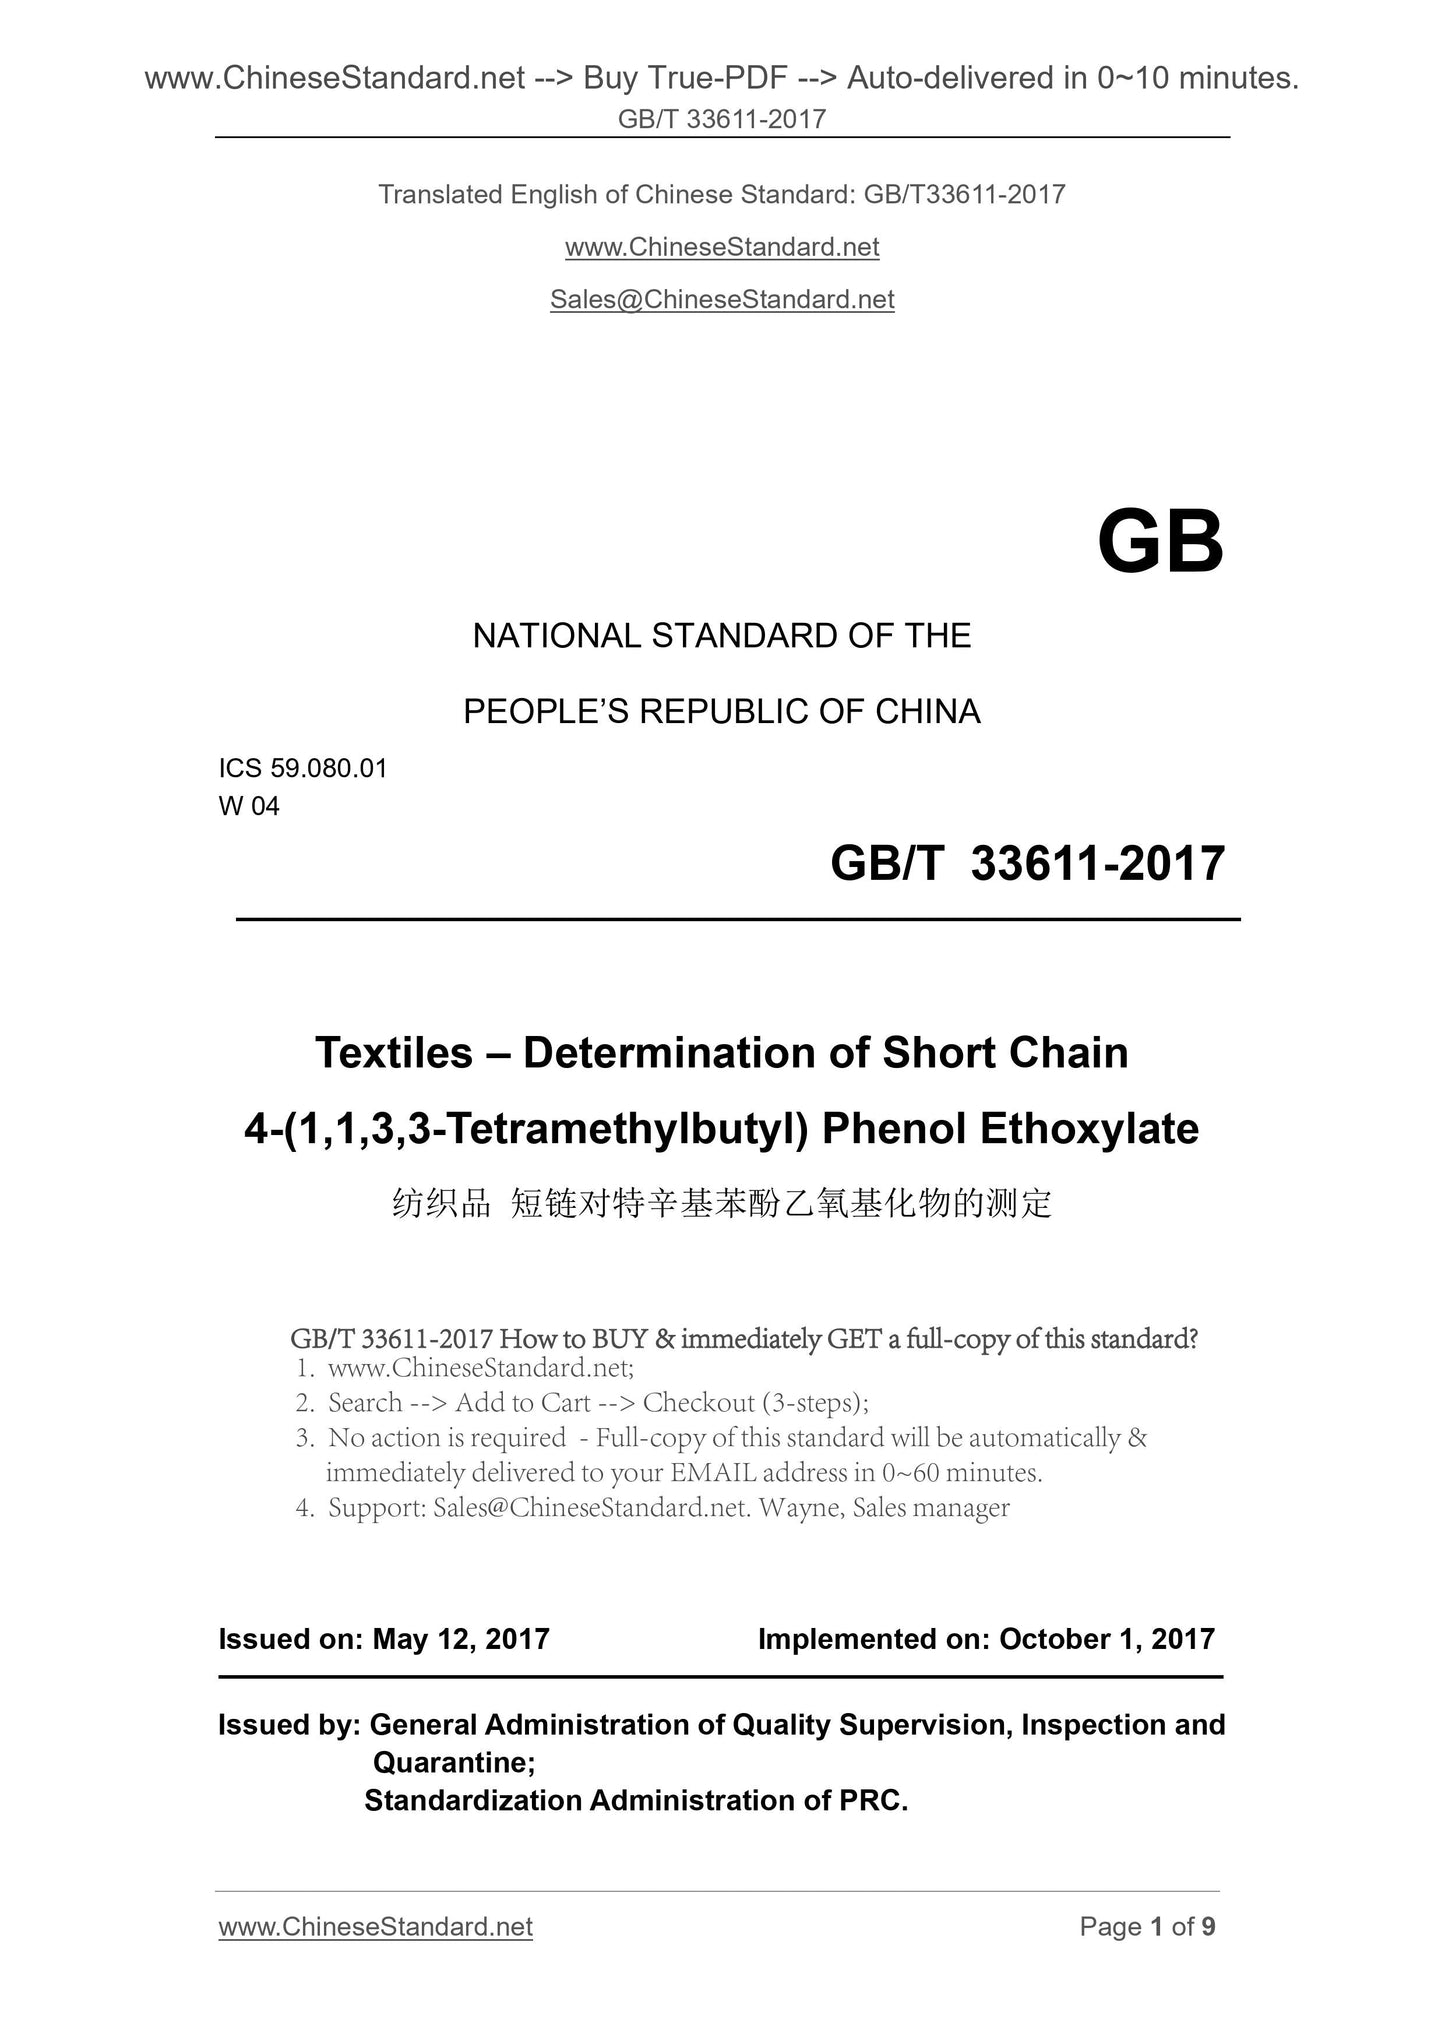 GB/T 33611-2017 Page 1